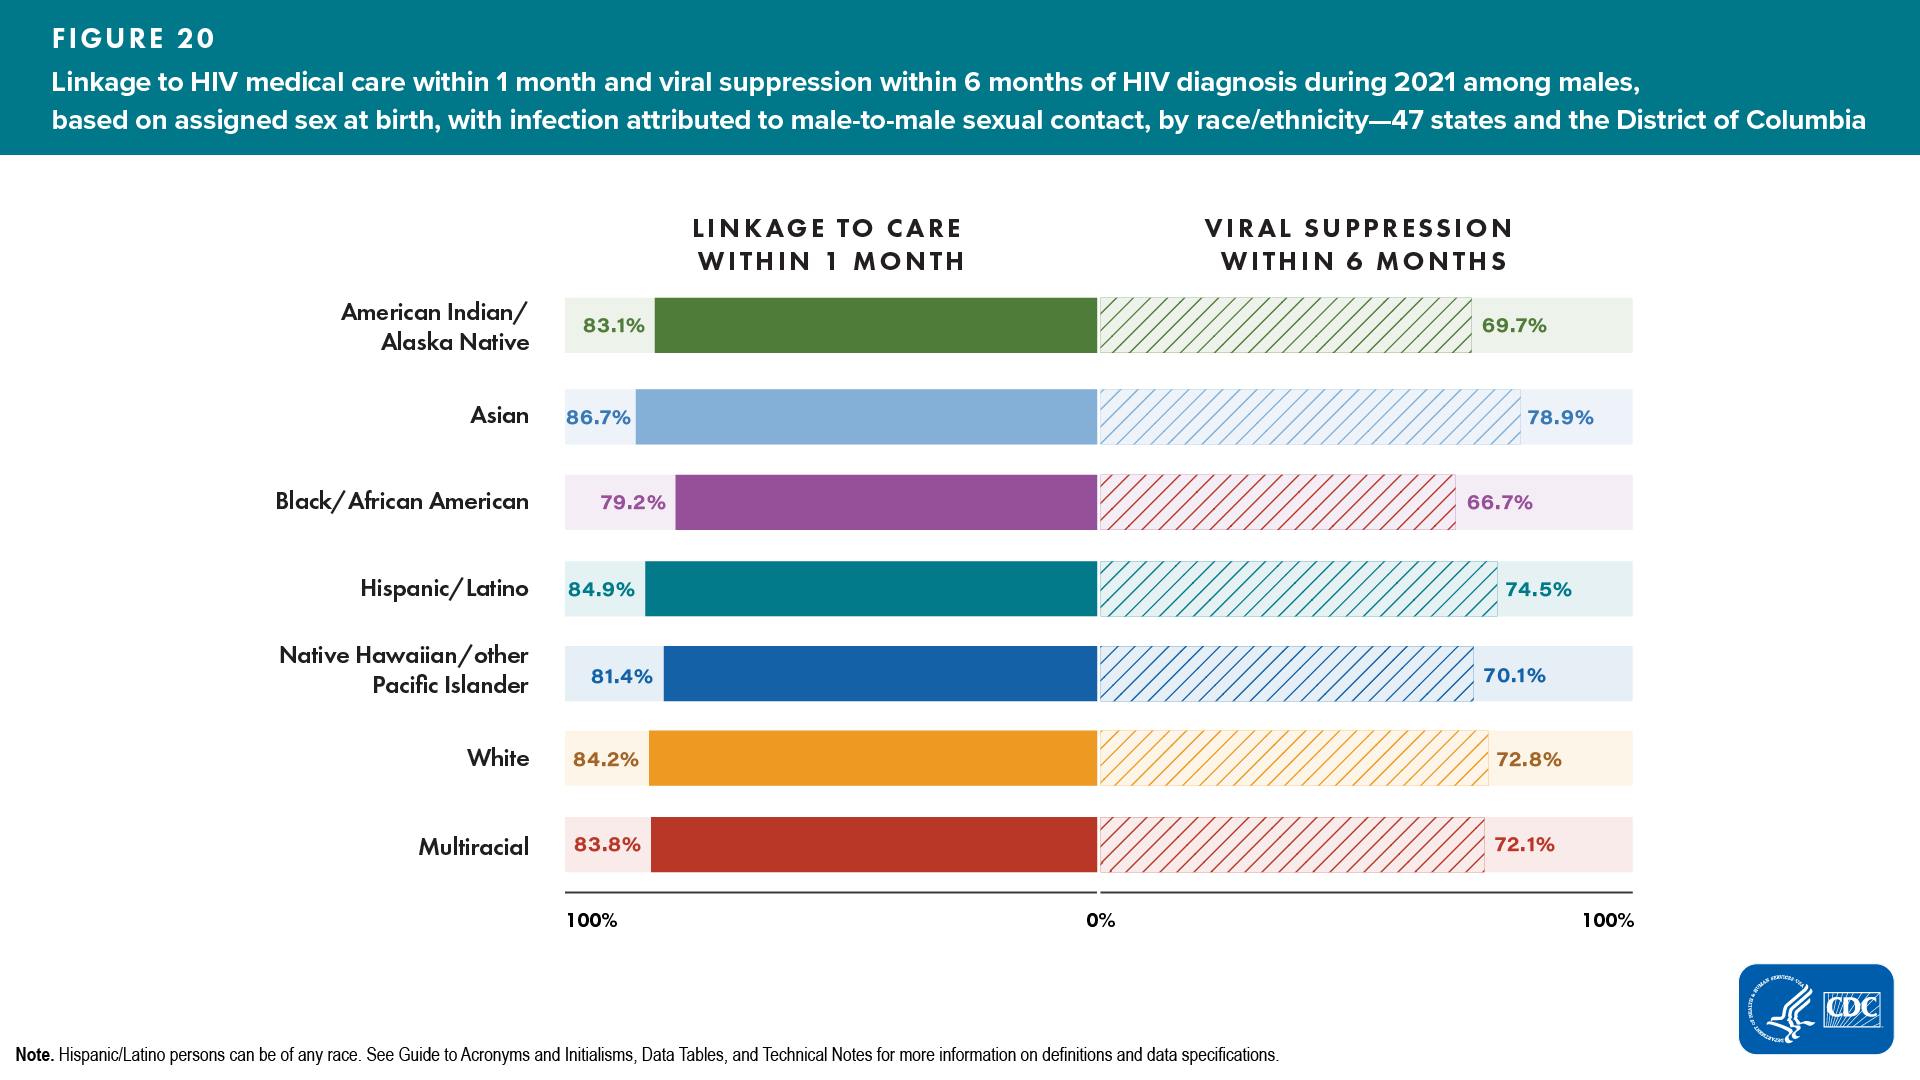 Figure 20. Linkage to HIV medical care within 1 month and viral suppression within 6 months of HIV diagnosis during 2021 among males, based on assigned sex at birth, with infection attributed to male-to-male sexual contact, by race/ethnicity — 47 states and the District of Columbia